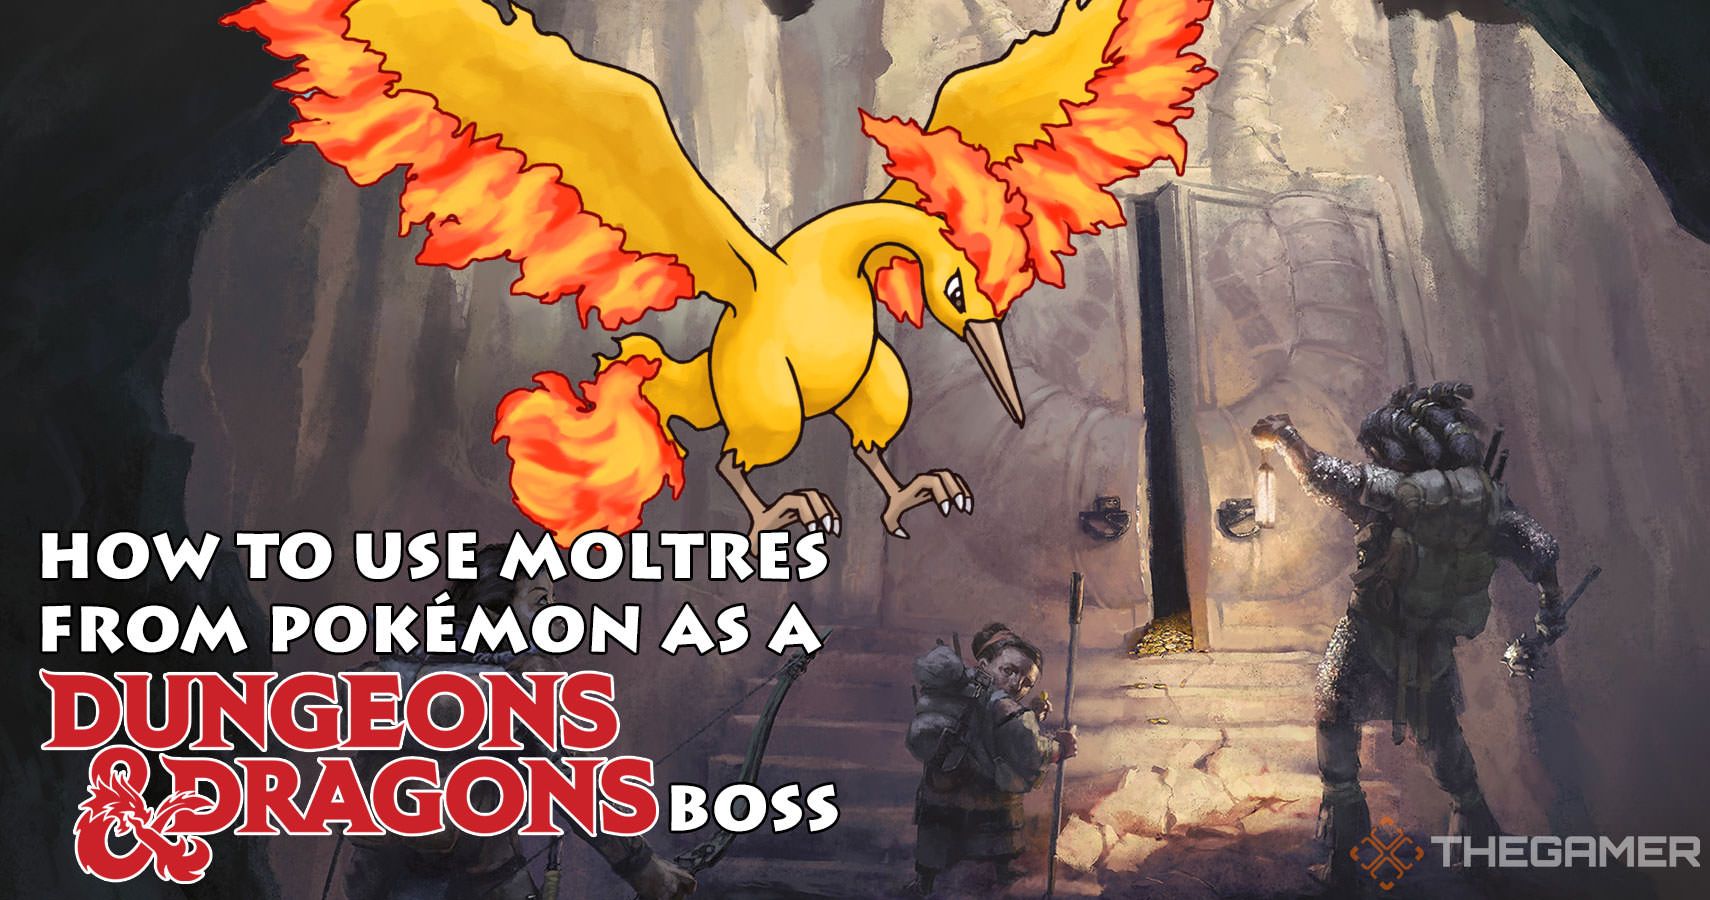 How To Use Moltres From Pokemon As A D&D Boss